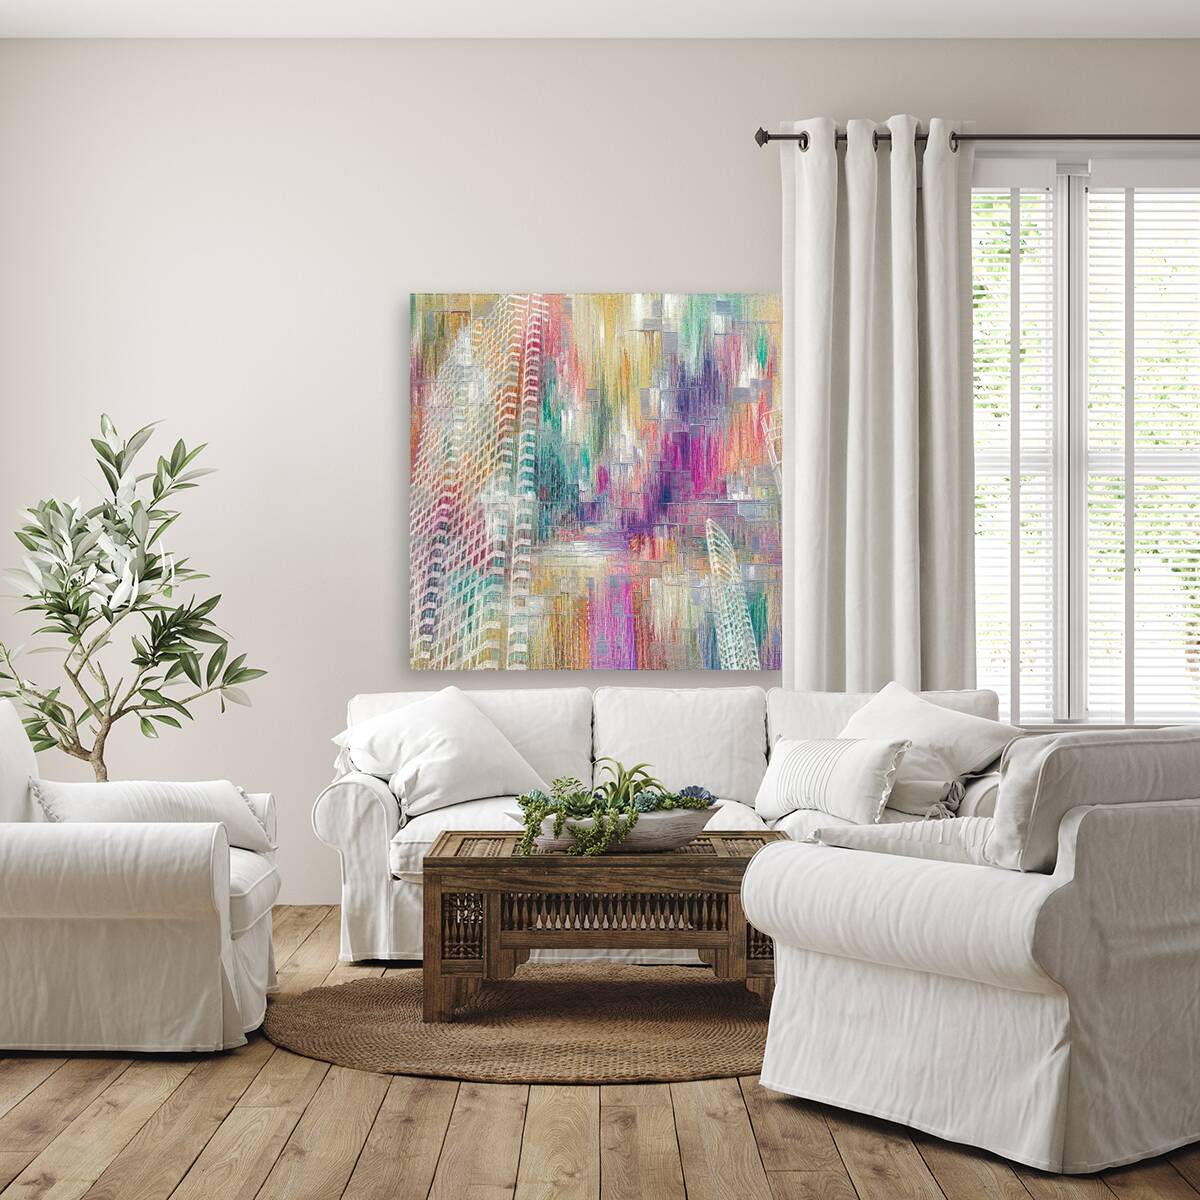 Beyond Glass: Toronto's Chromatic Canvas by Le Boulanger - Giclée Stretched Canvas Print